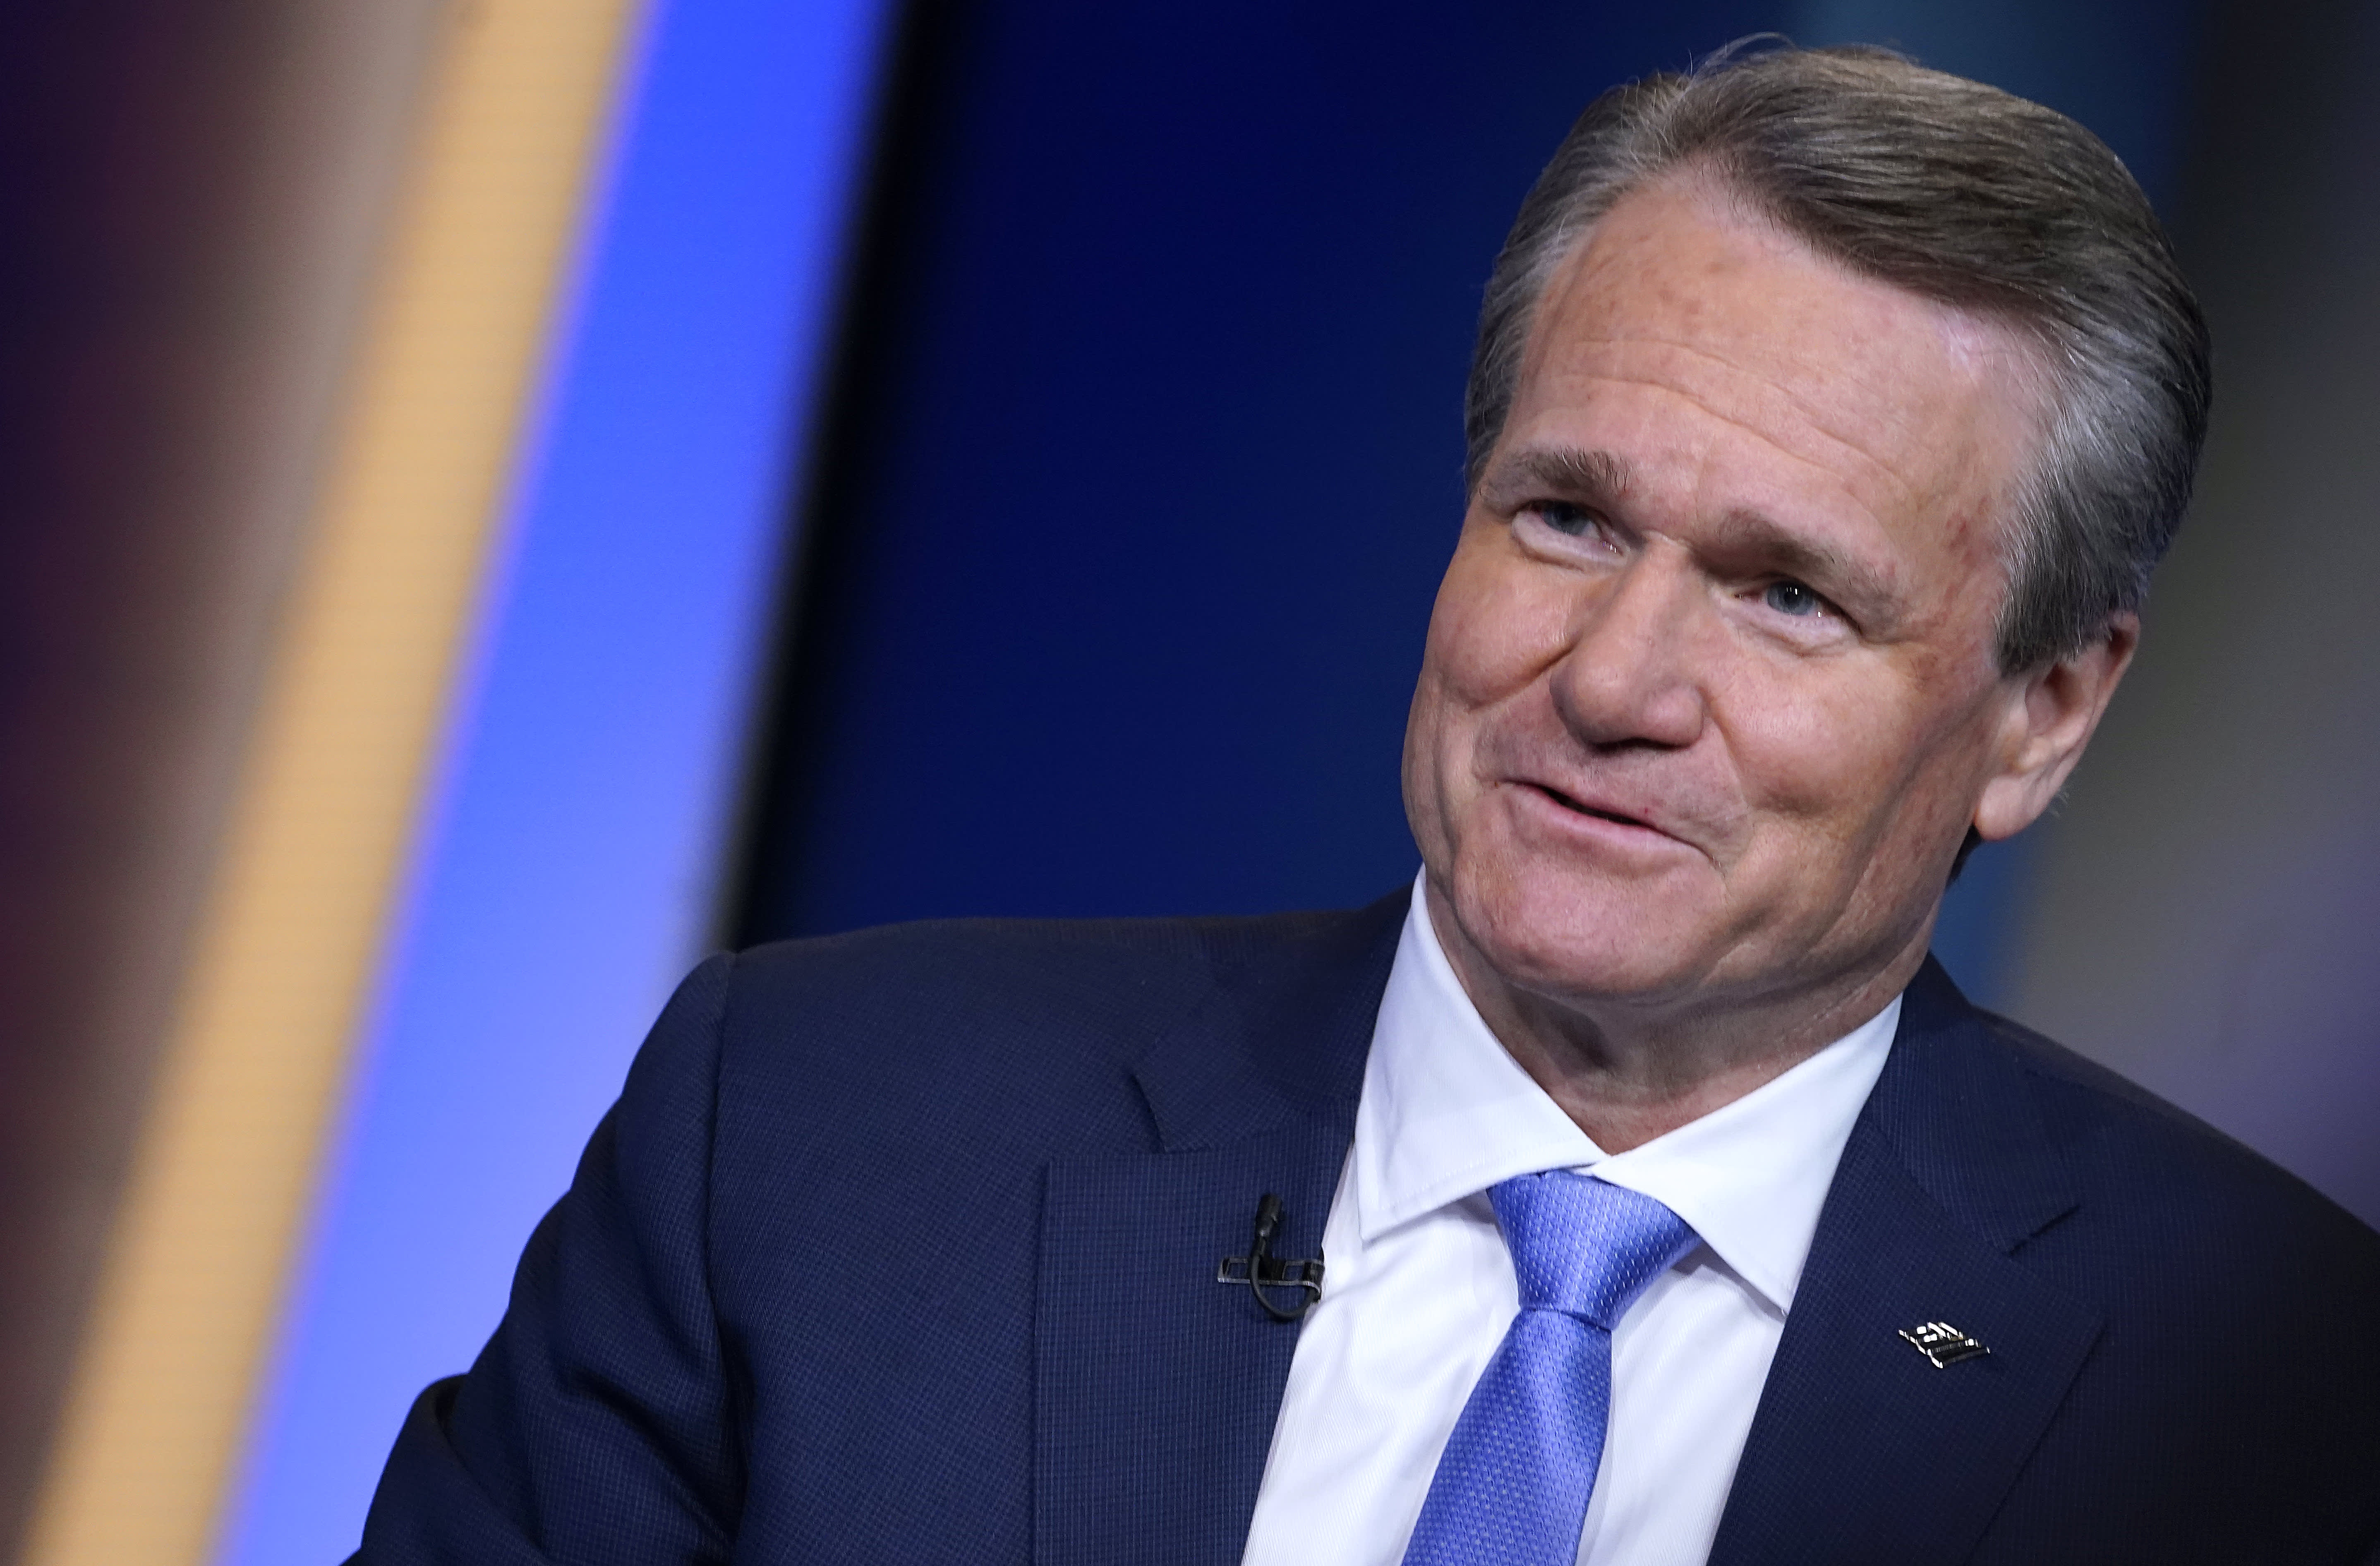 Bank of America CEO Brian Moynihan says U.S. consumer spending ‘very strong’ in February